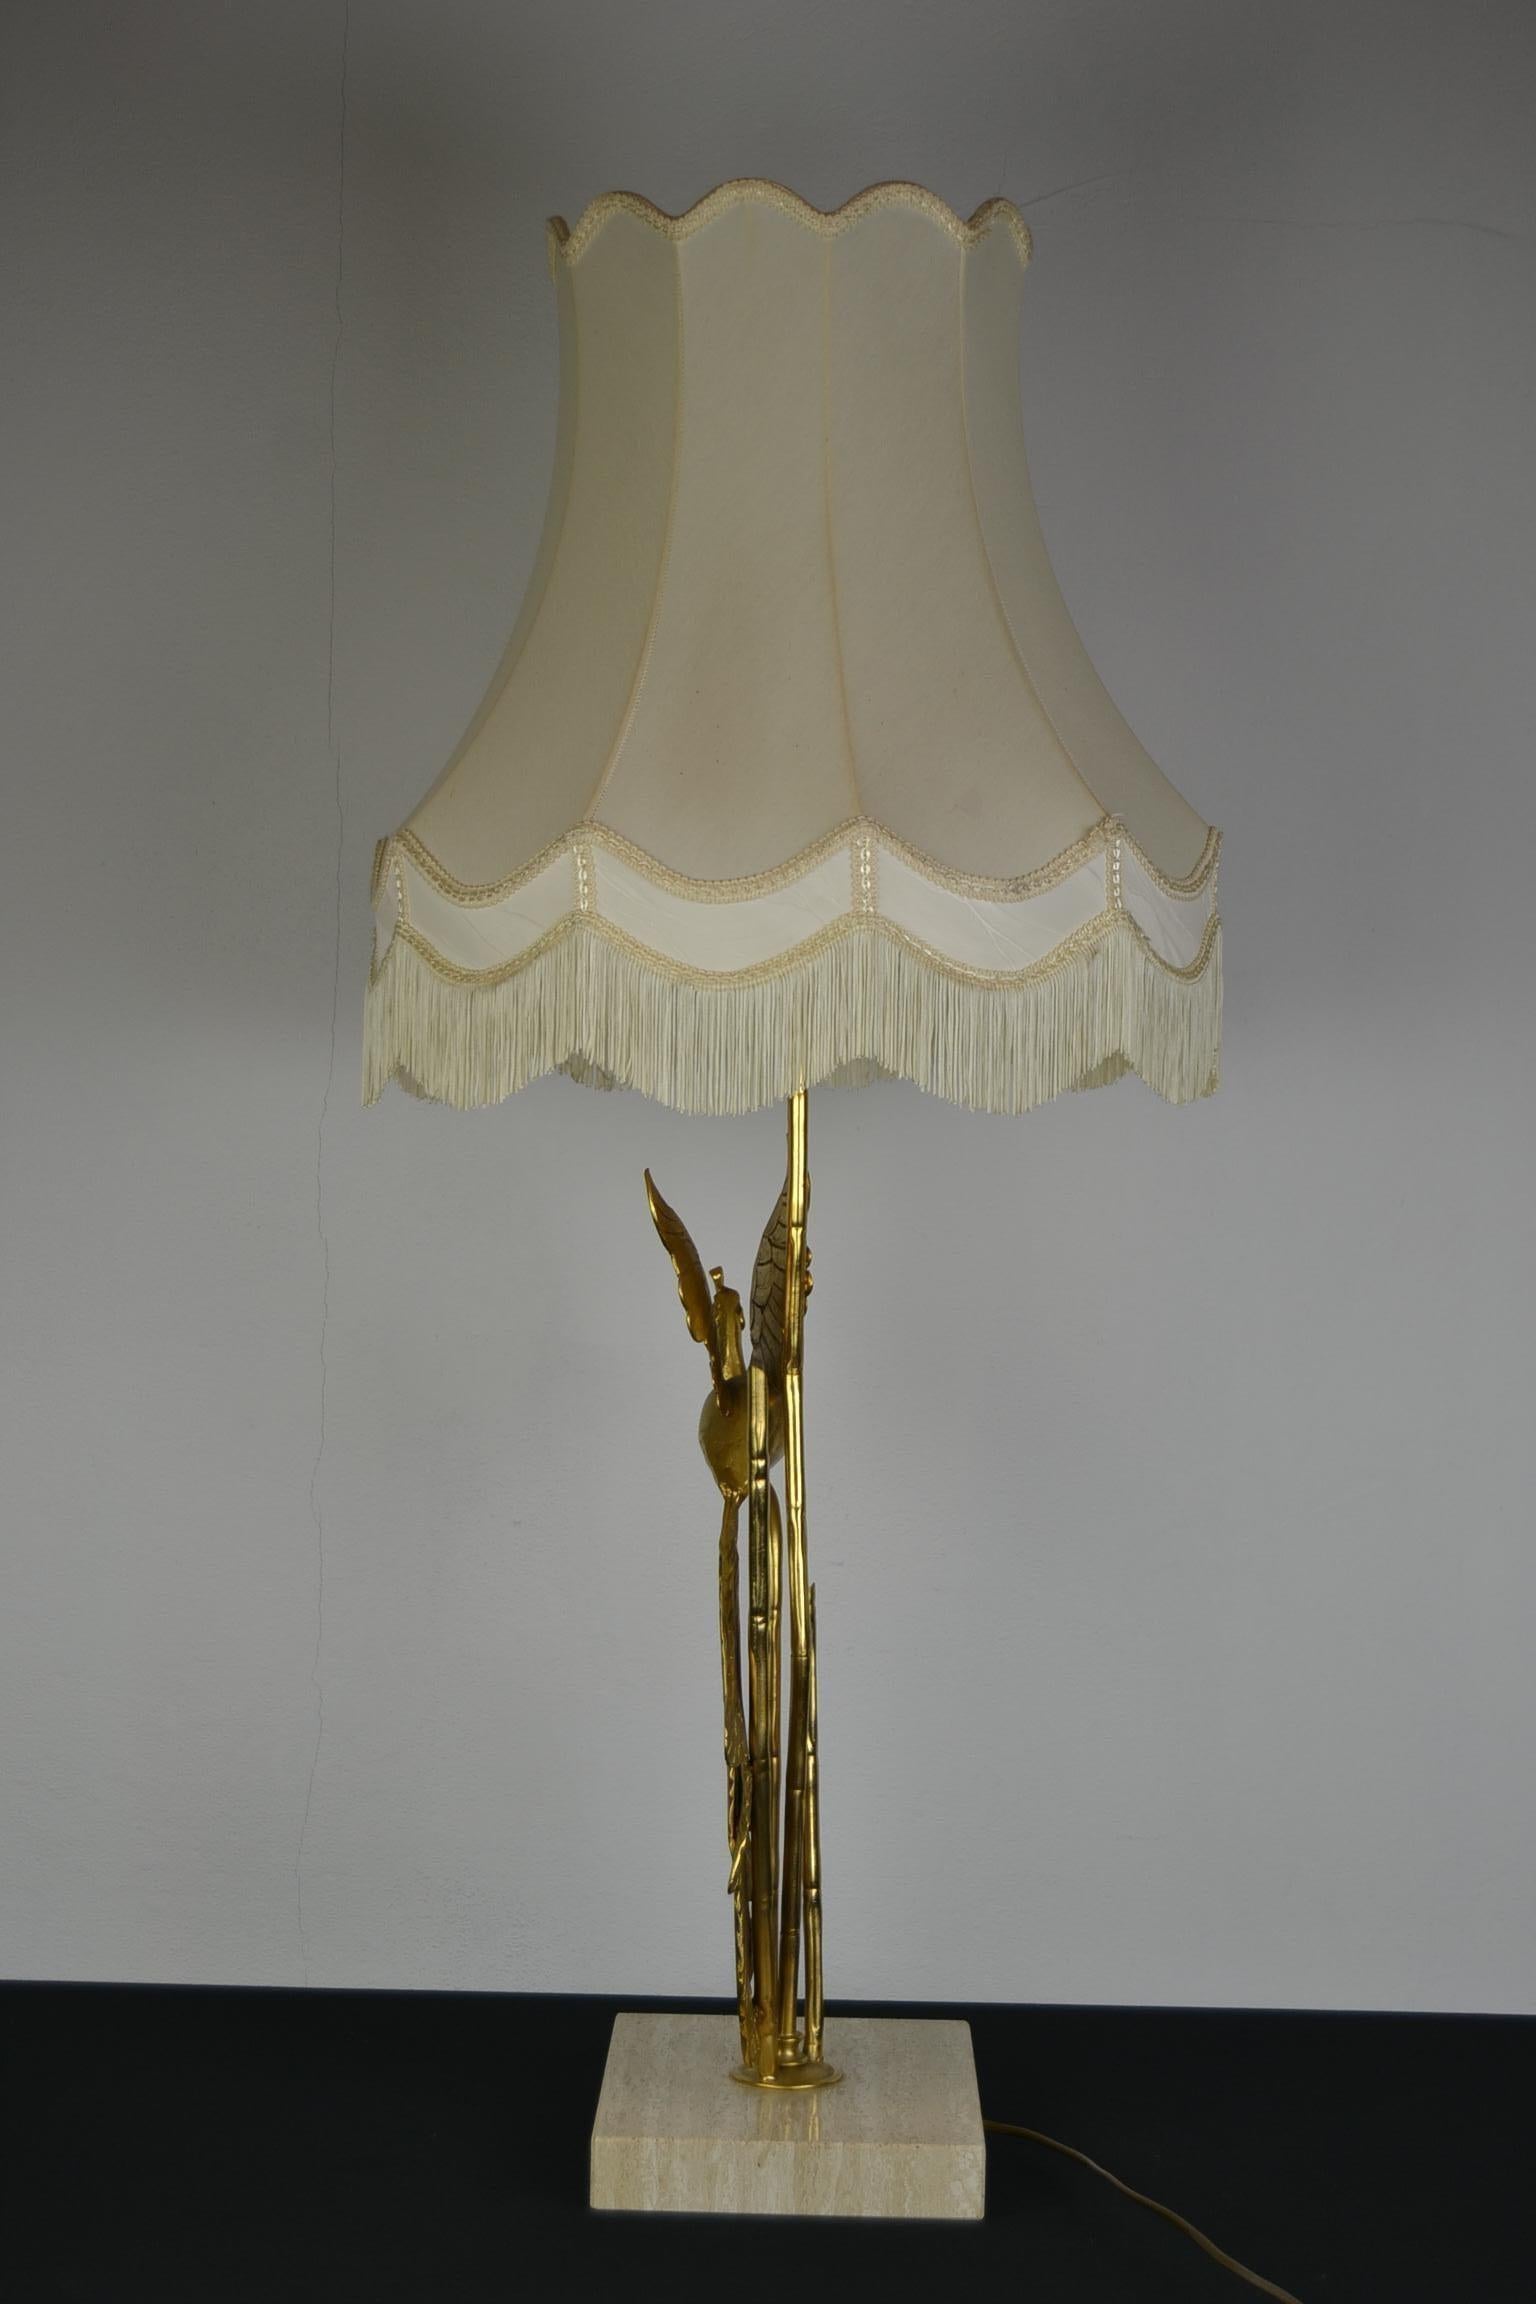 Large Lanciotto Galeotti Peacock Table Lamp for L'Originale, Italy, 1970s For Sale 7